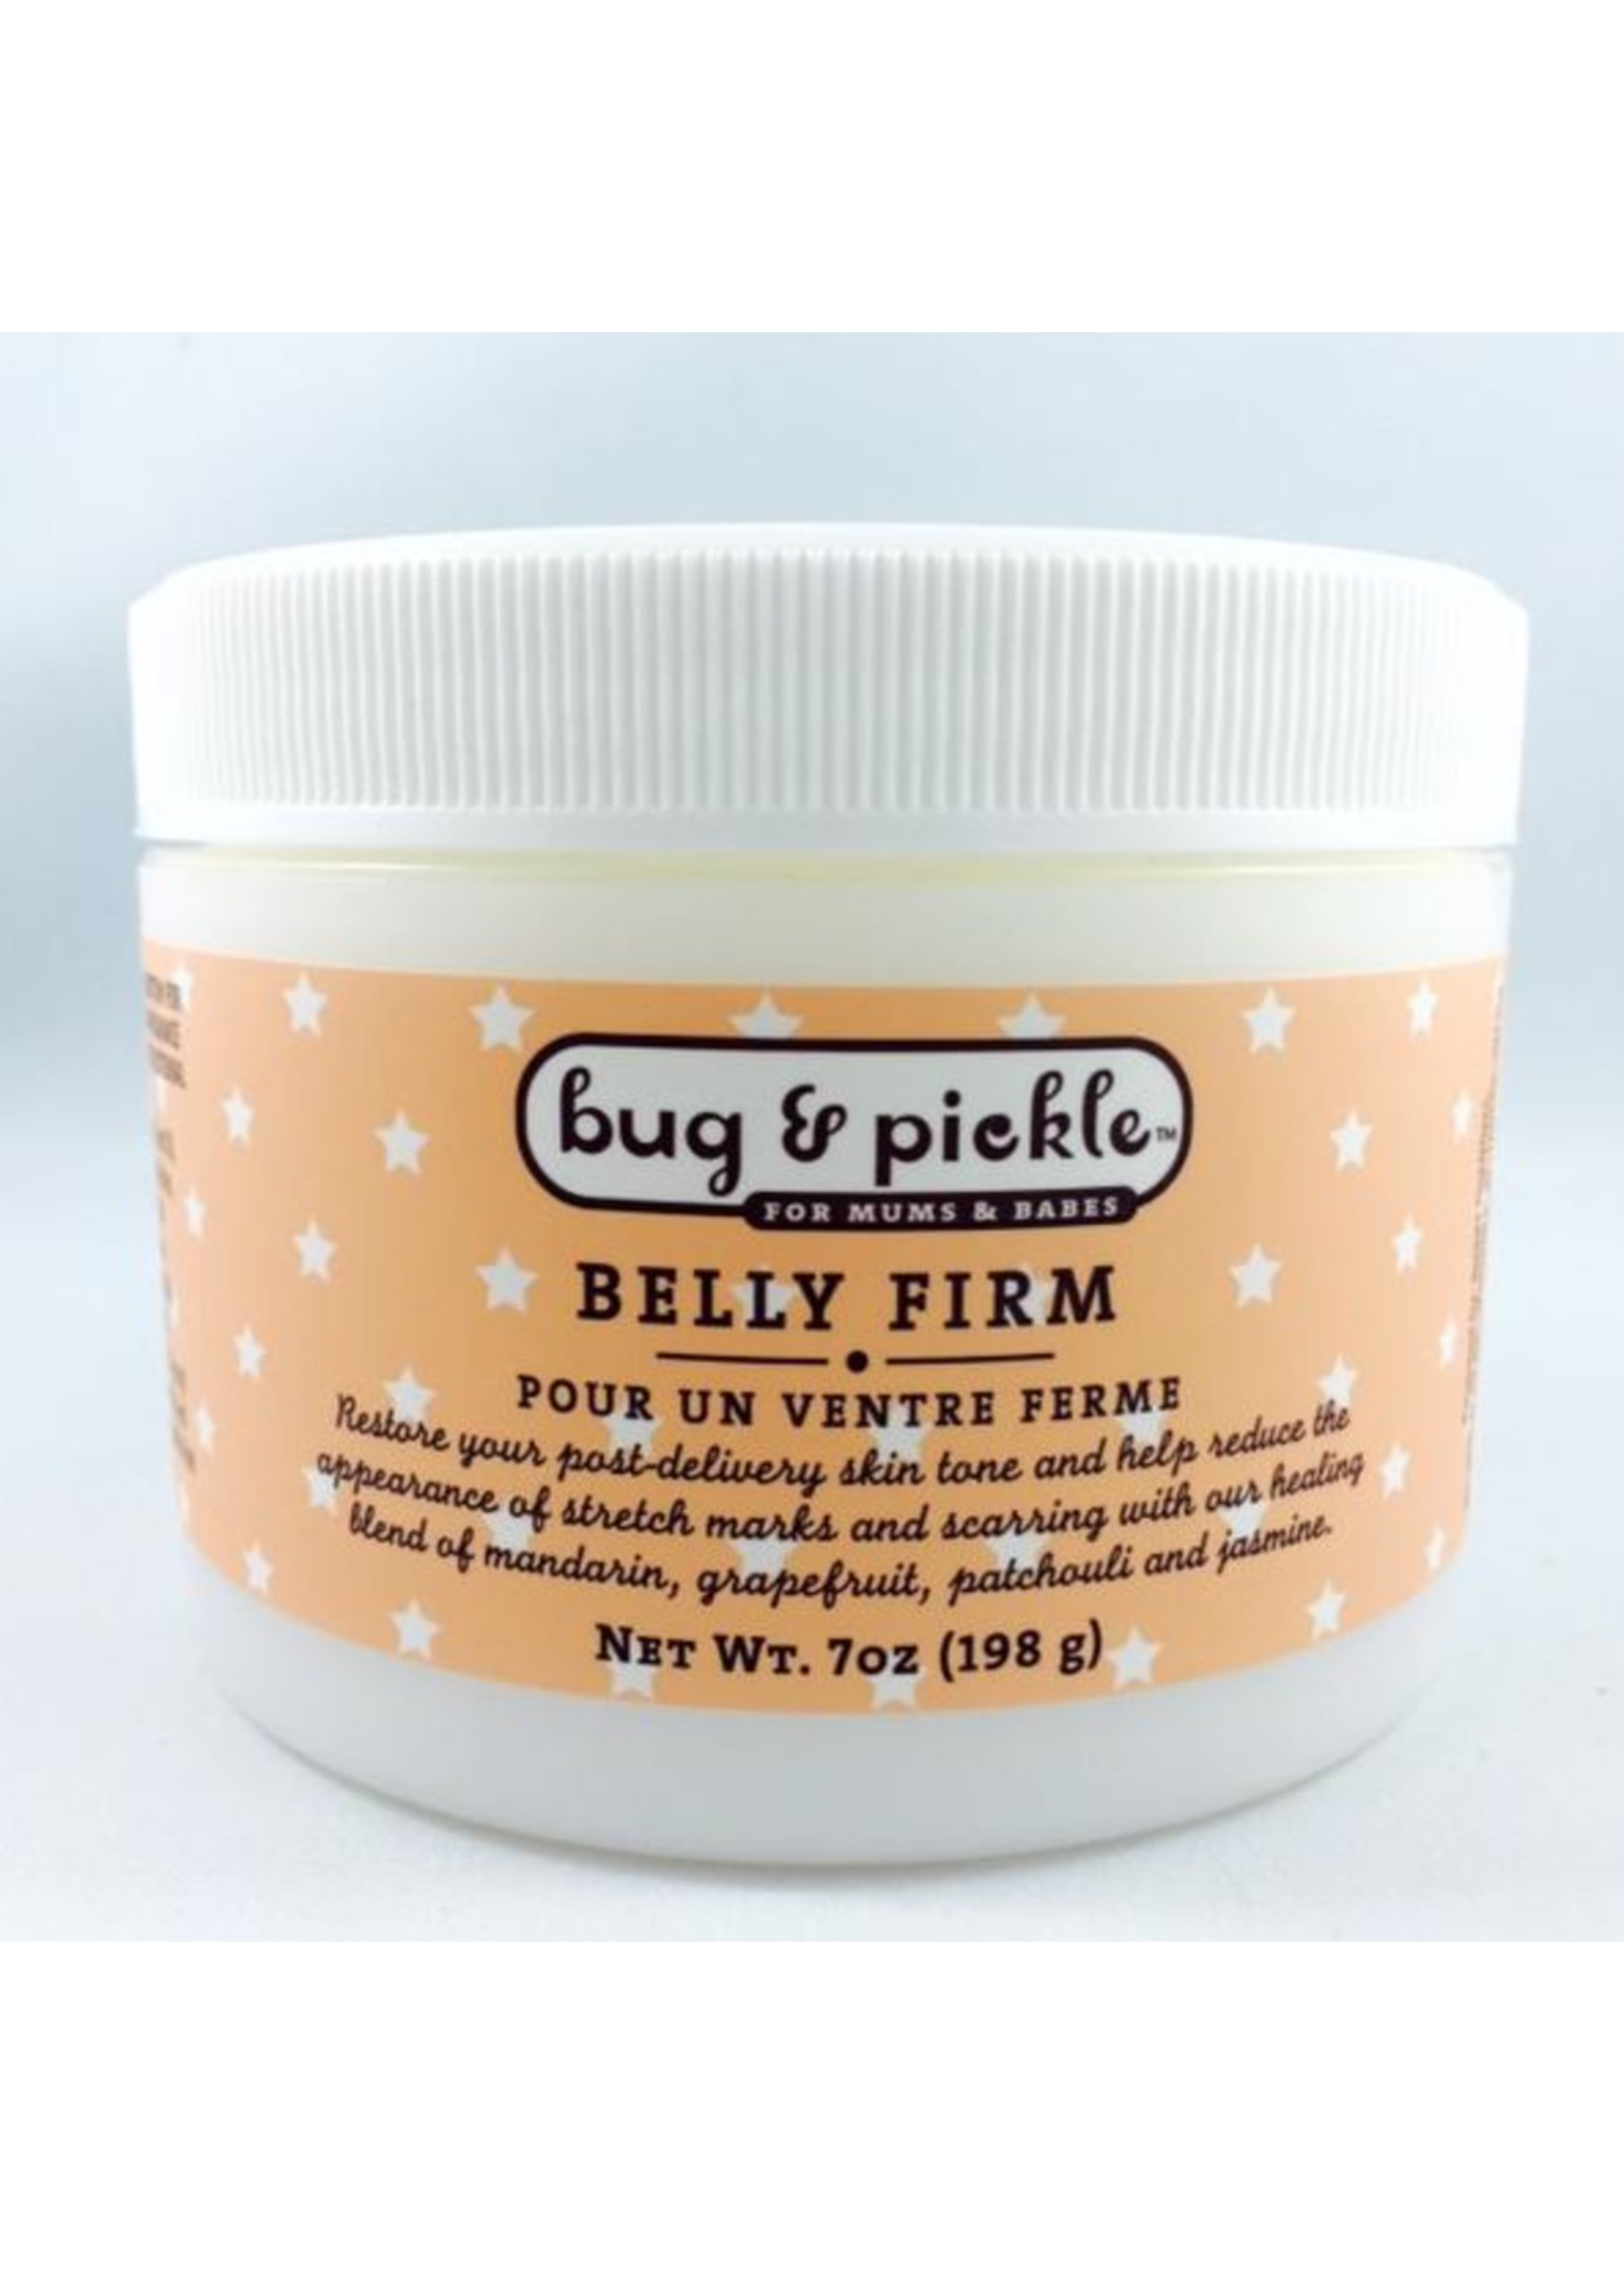 Bug & Pickle Bug & Pickle Belly Firm